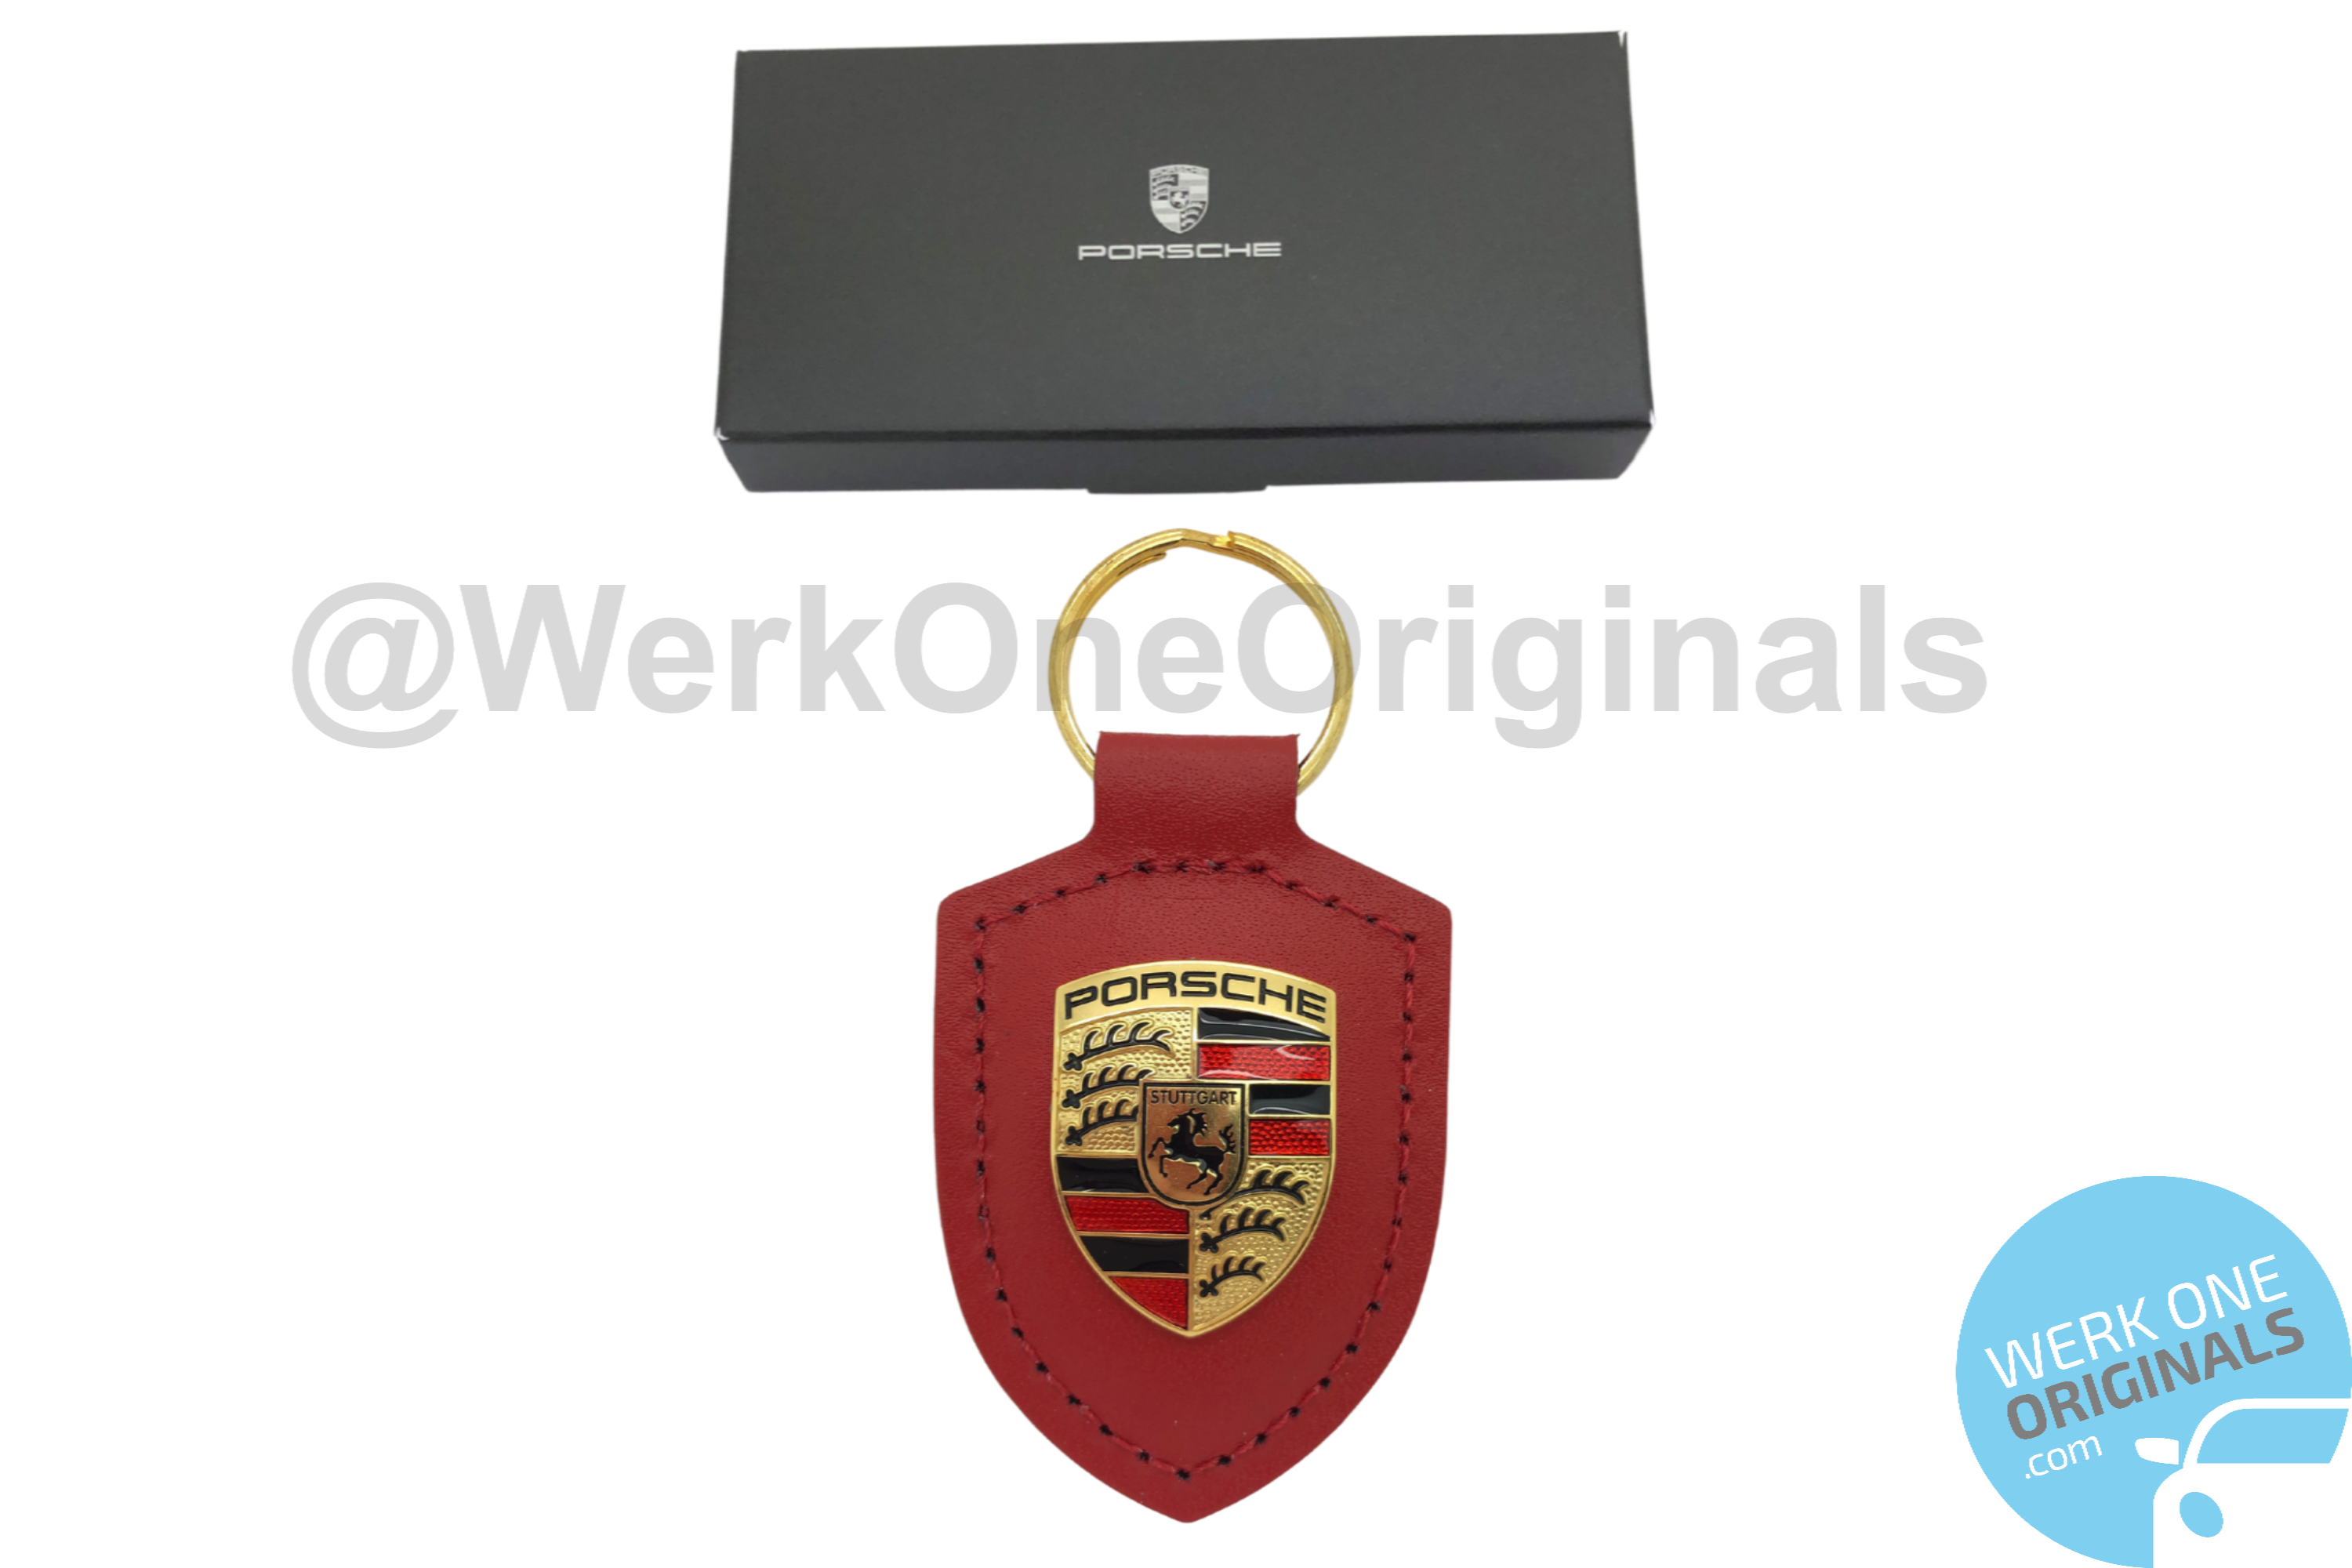 Porsche Official Crest Leather Key Fob in Guards Red